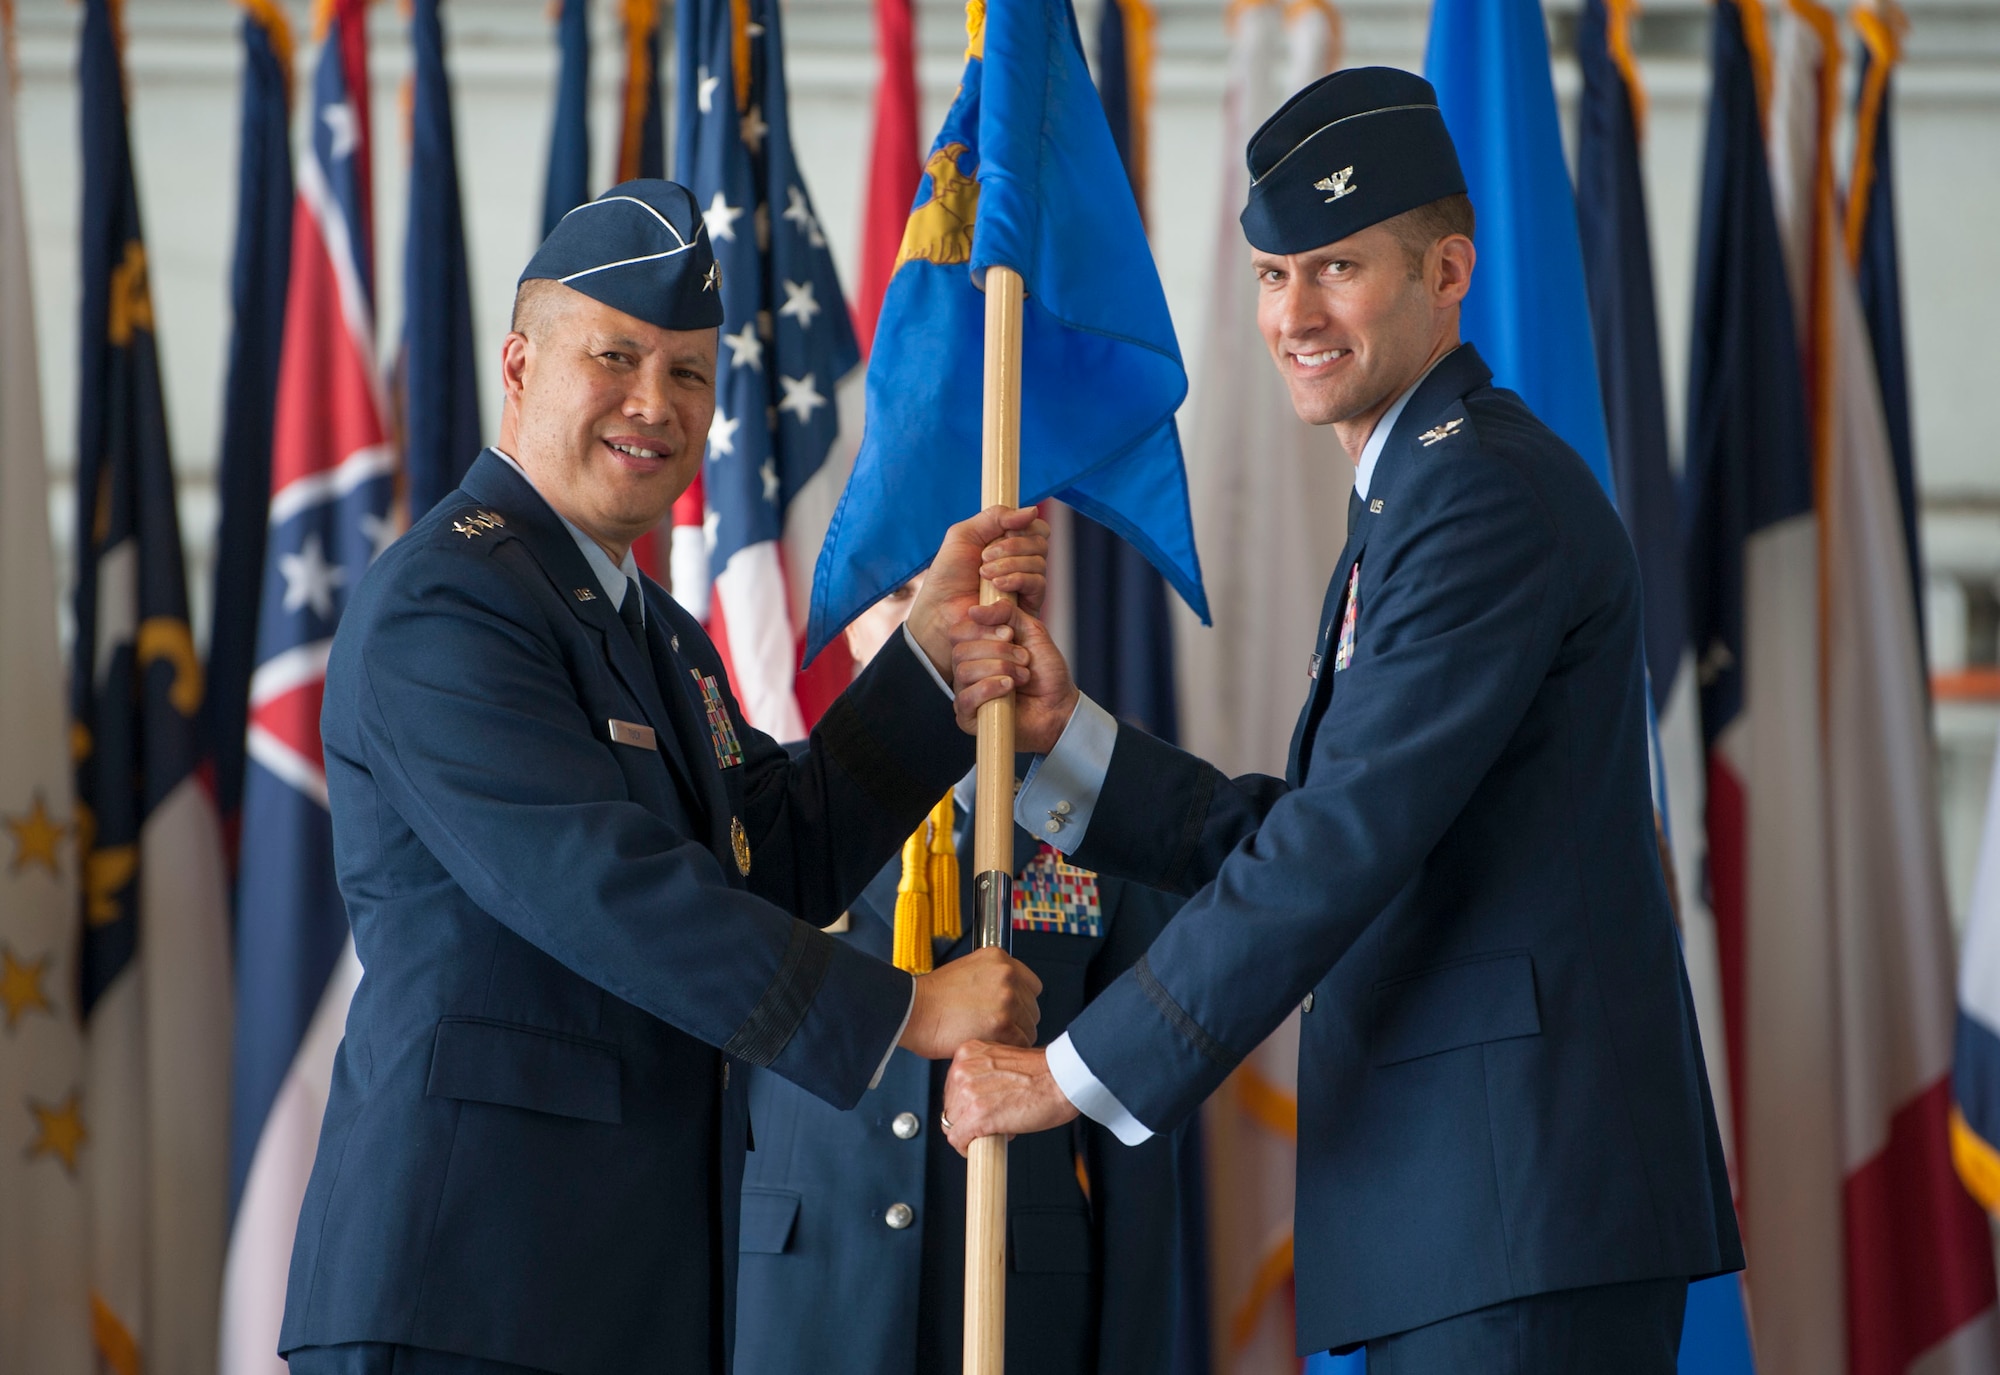 U.S. Air Force Lt. Gen. GI Tuck, commander of the 18th Air Force, passes the 6th Air Mobility Wing guidon to incoming commander, Col. Stephen Snelson, during the wing change of command ceremony at MacDill Air Force Base, Fla., June 29, 2018.